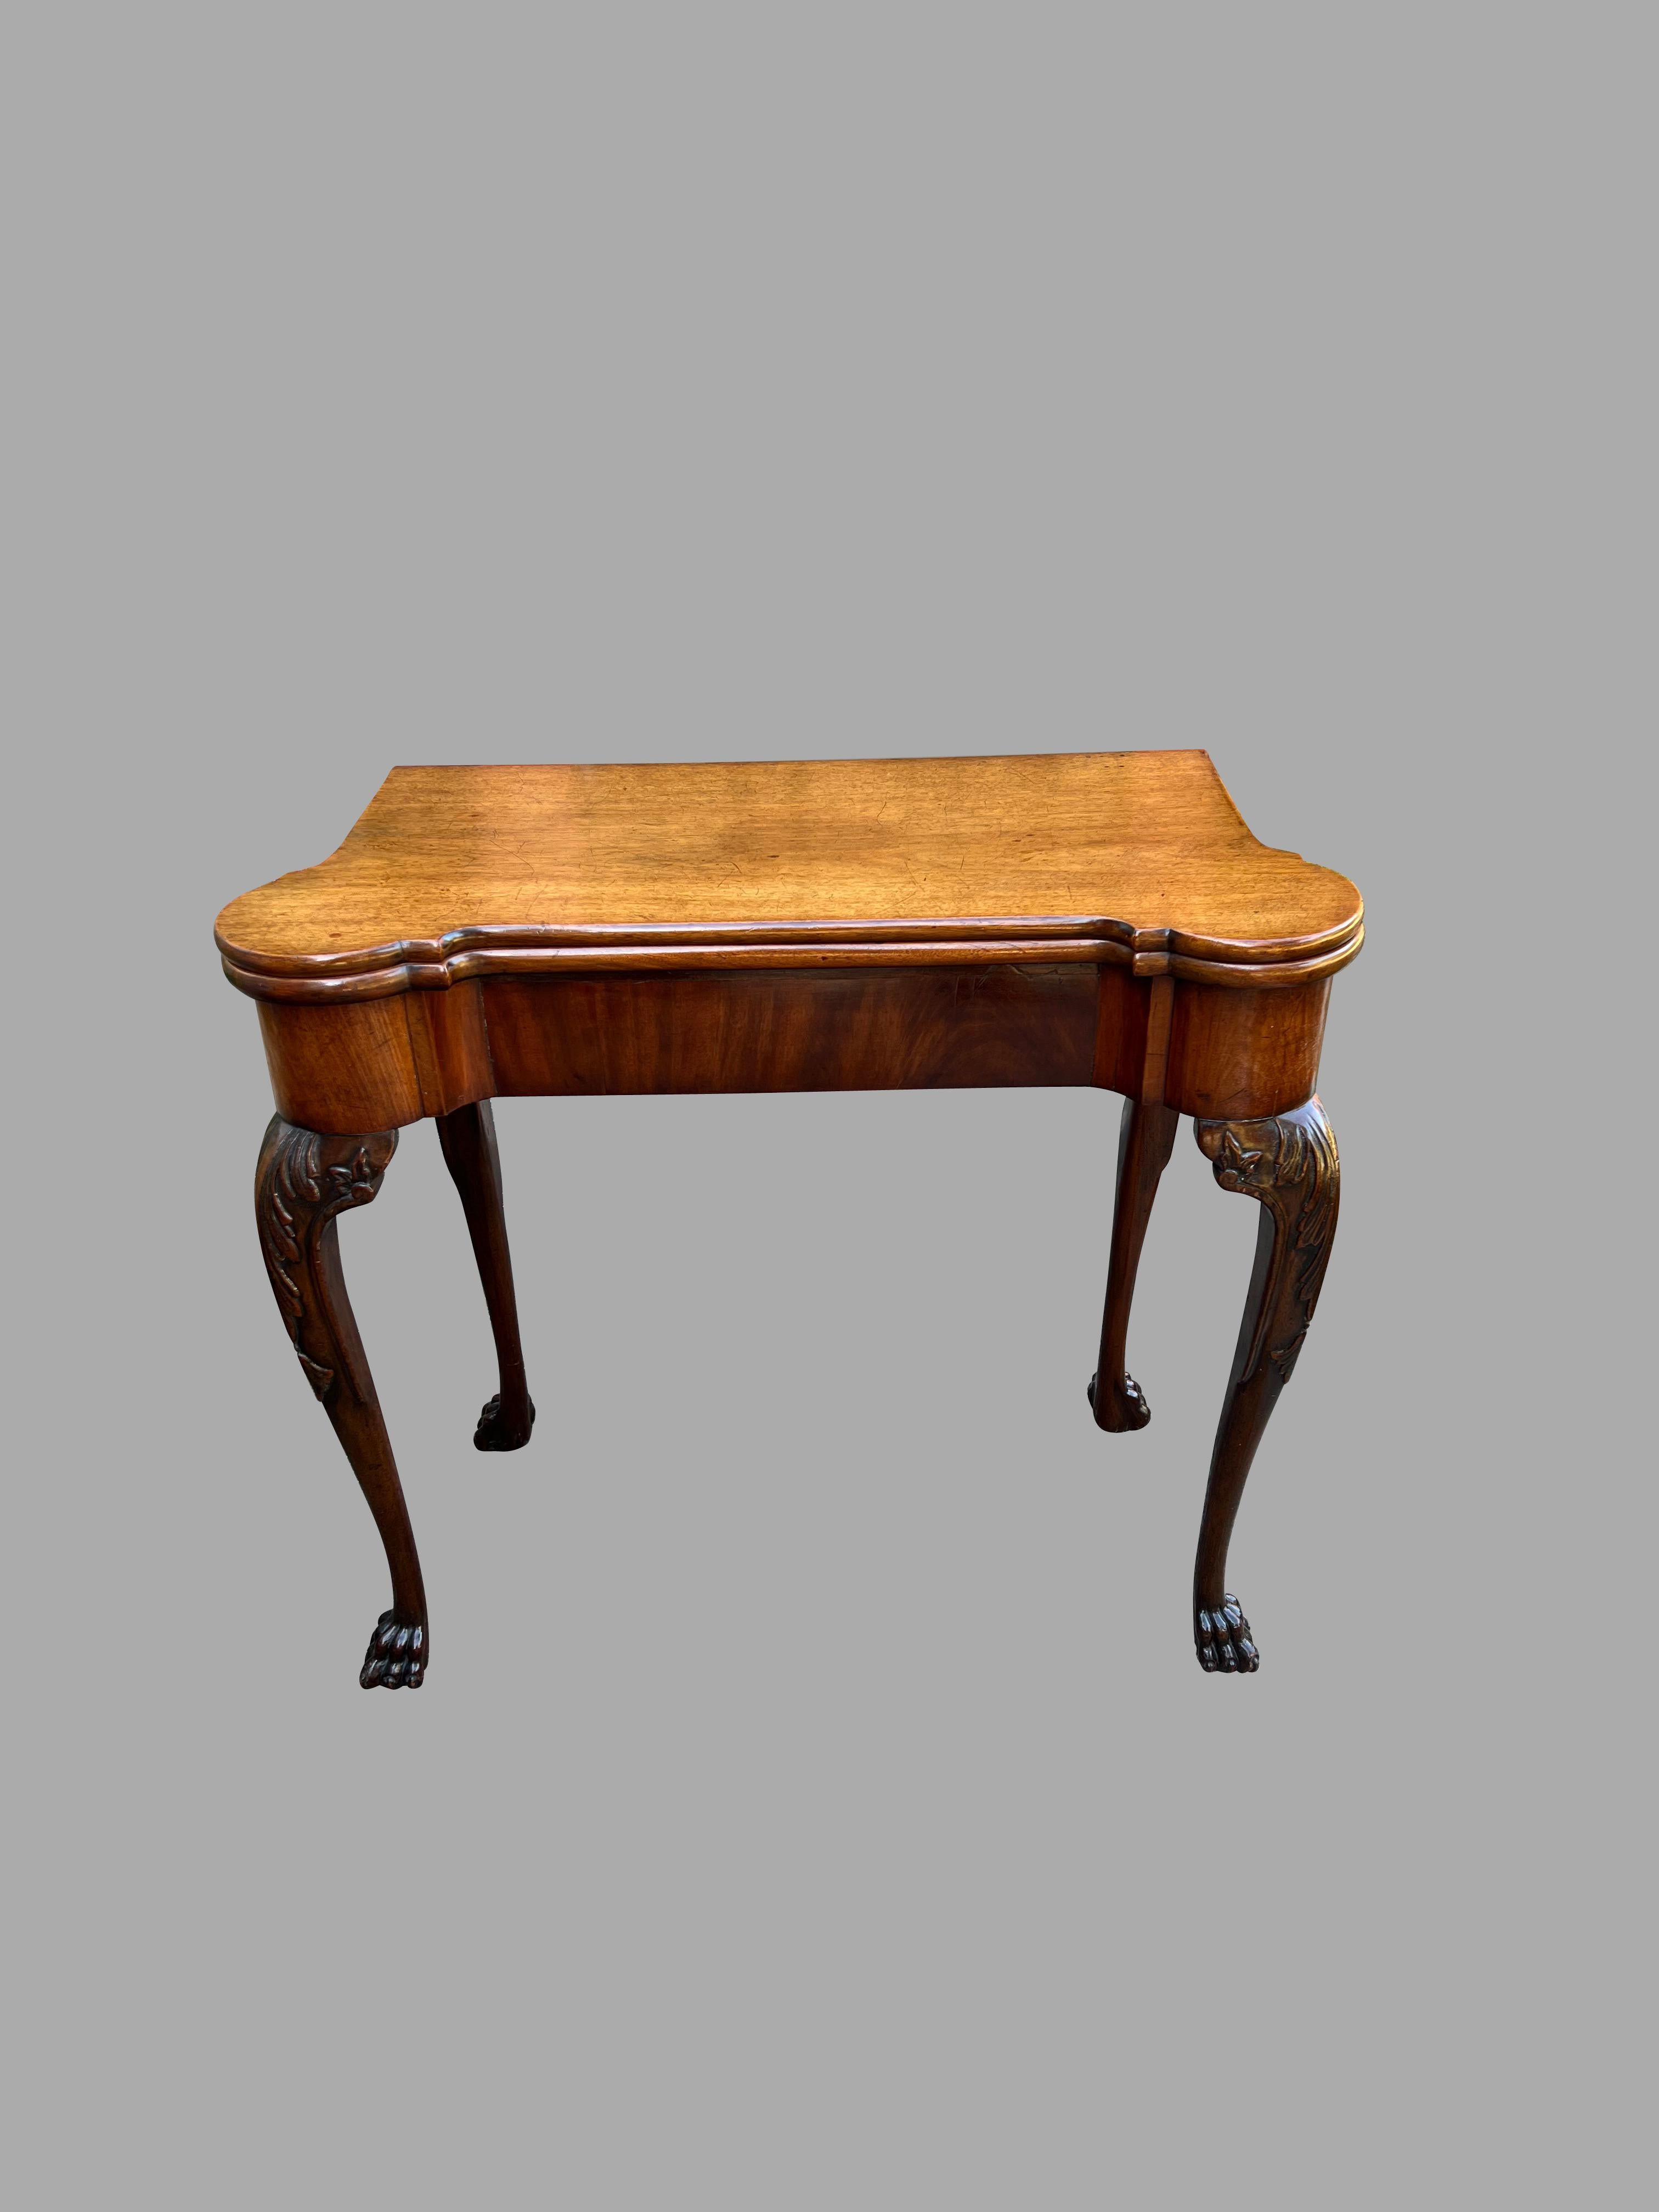 A good George II period mahogany card table, the shaped top over carved cabriole legs ending in hairy paw feet. The top, when opened, retains an old baize cover with 4 wells for markers, the corners designed to support candlesticks. Old finish.